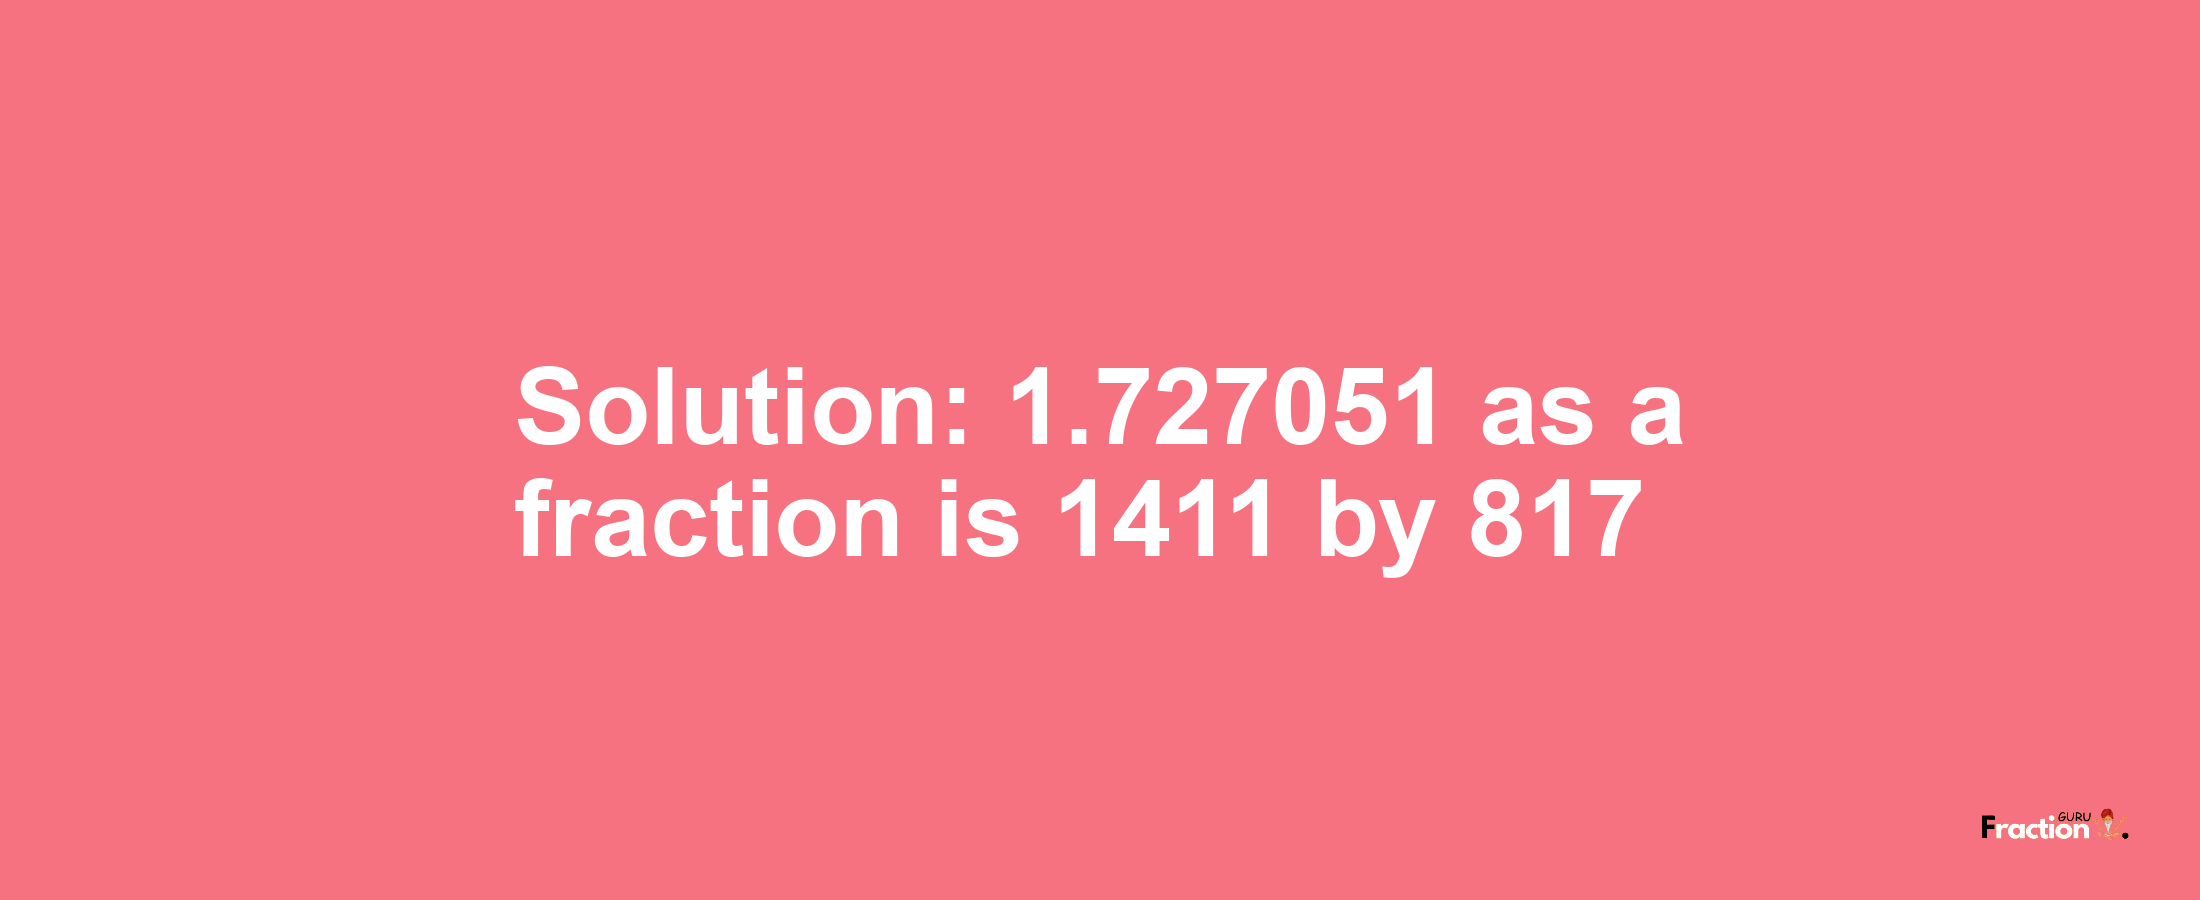 Solution:1.727051 as a fraction is 1411/817